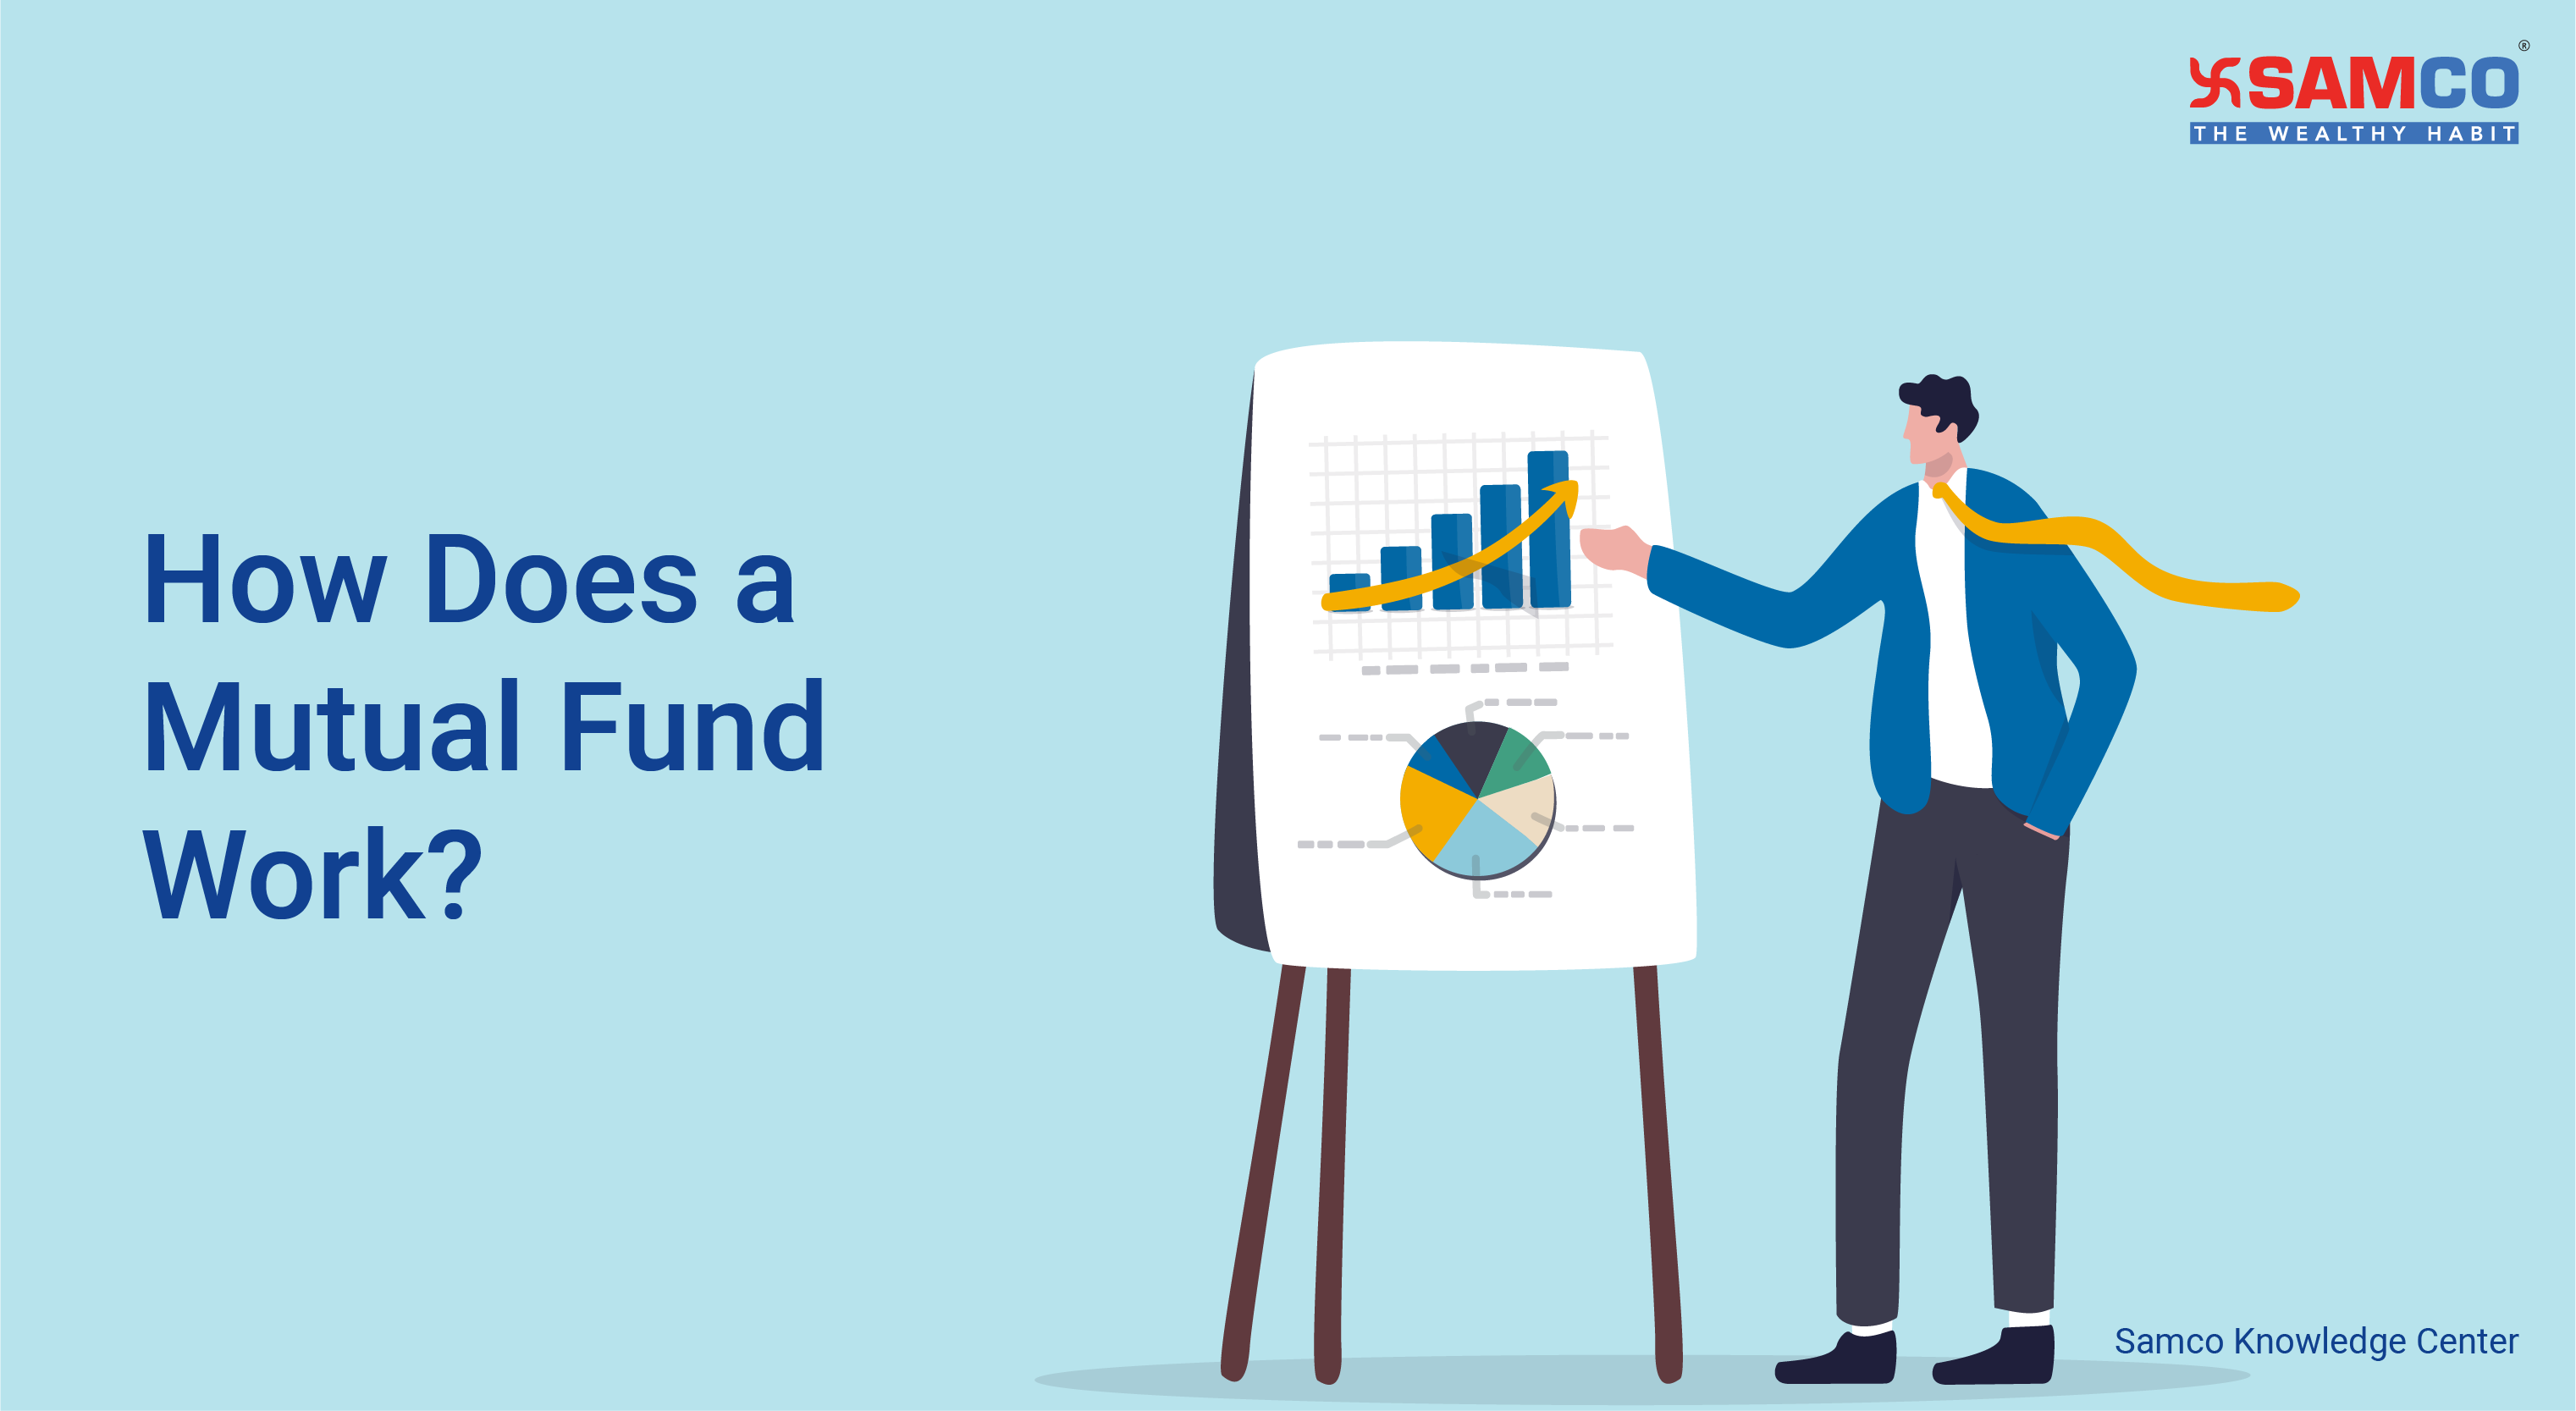 How Does a Mutual Fund Work?